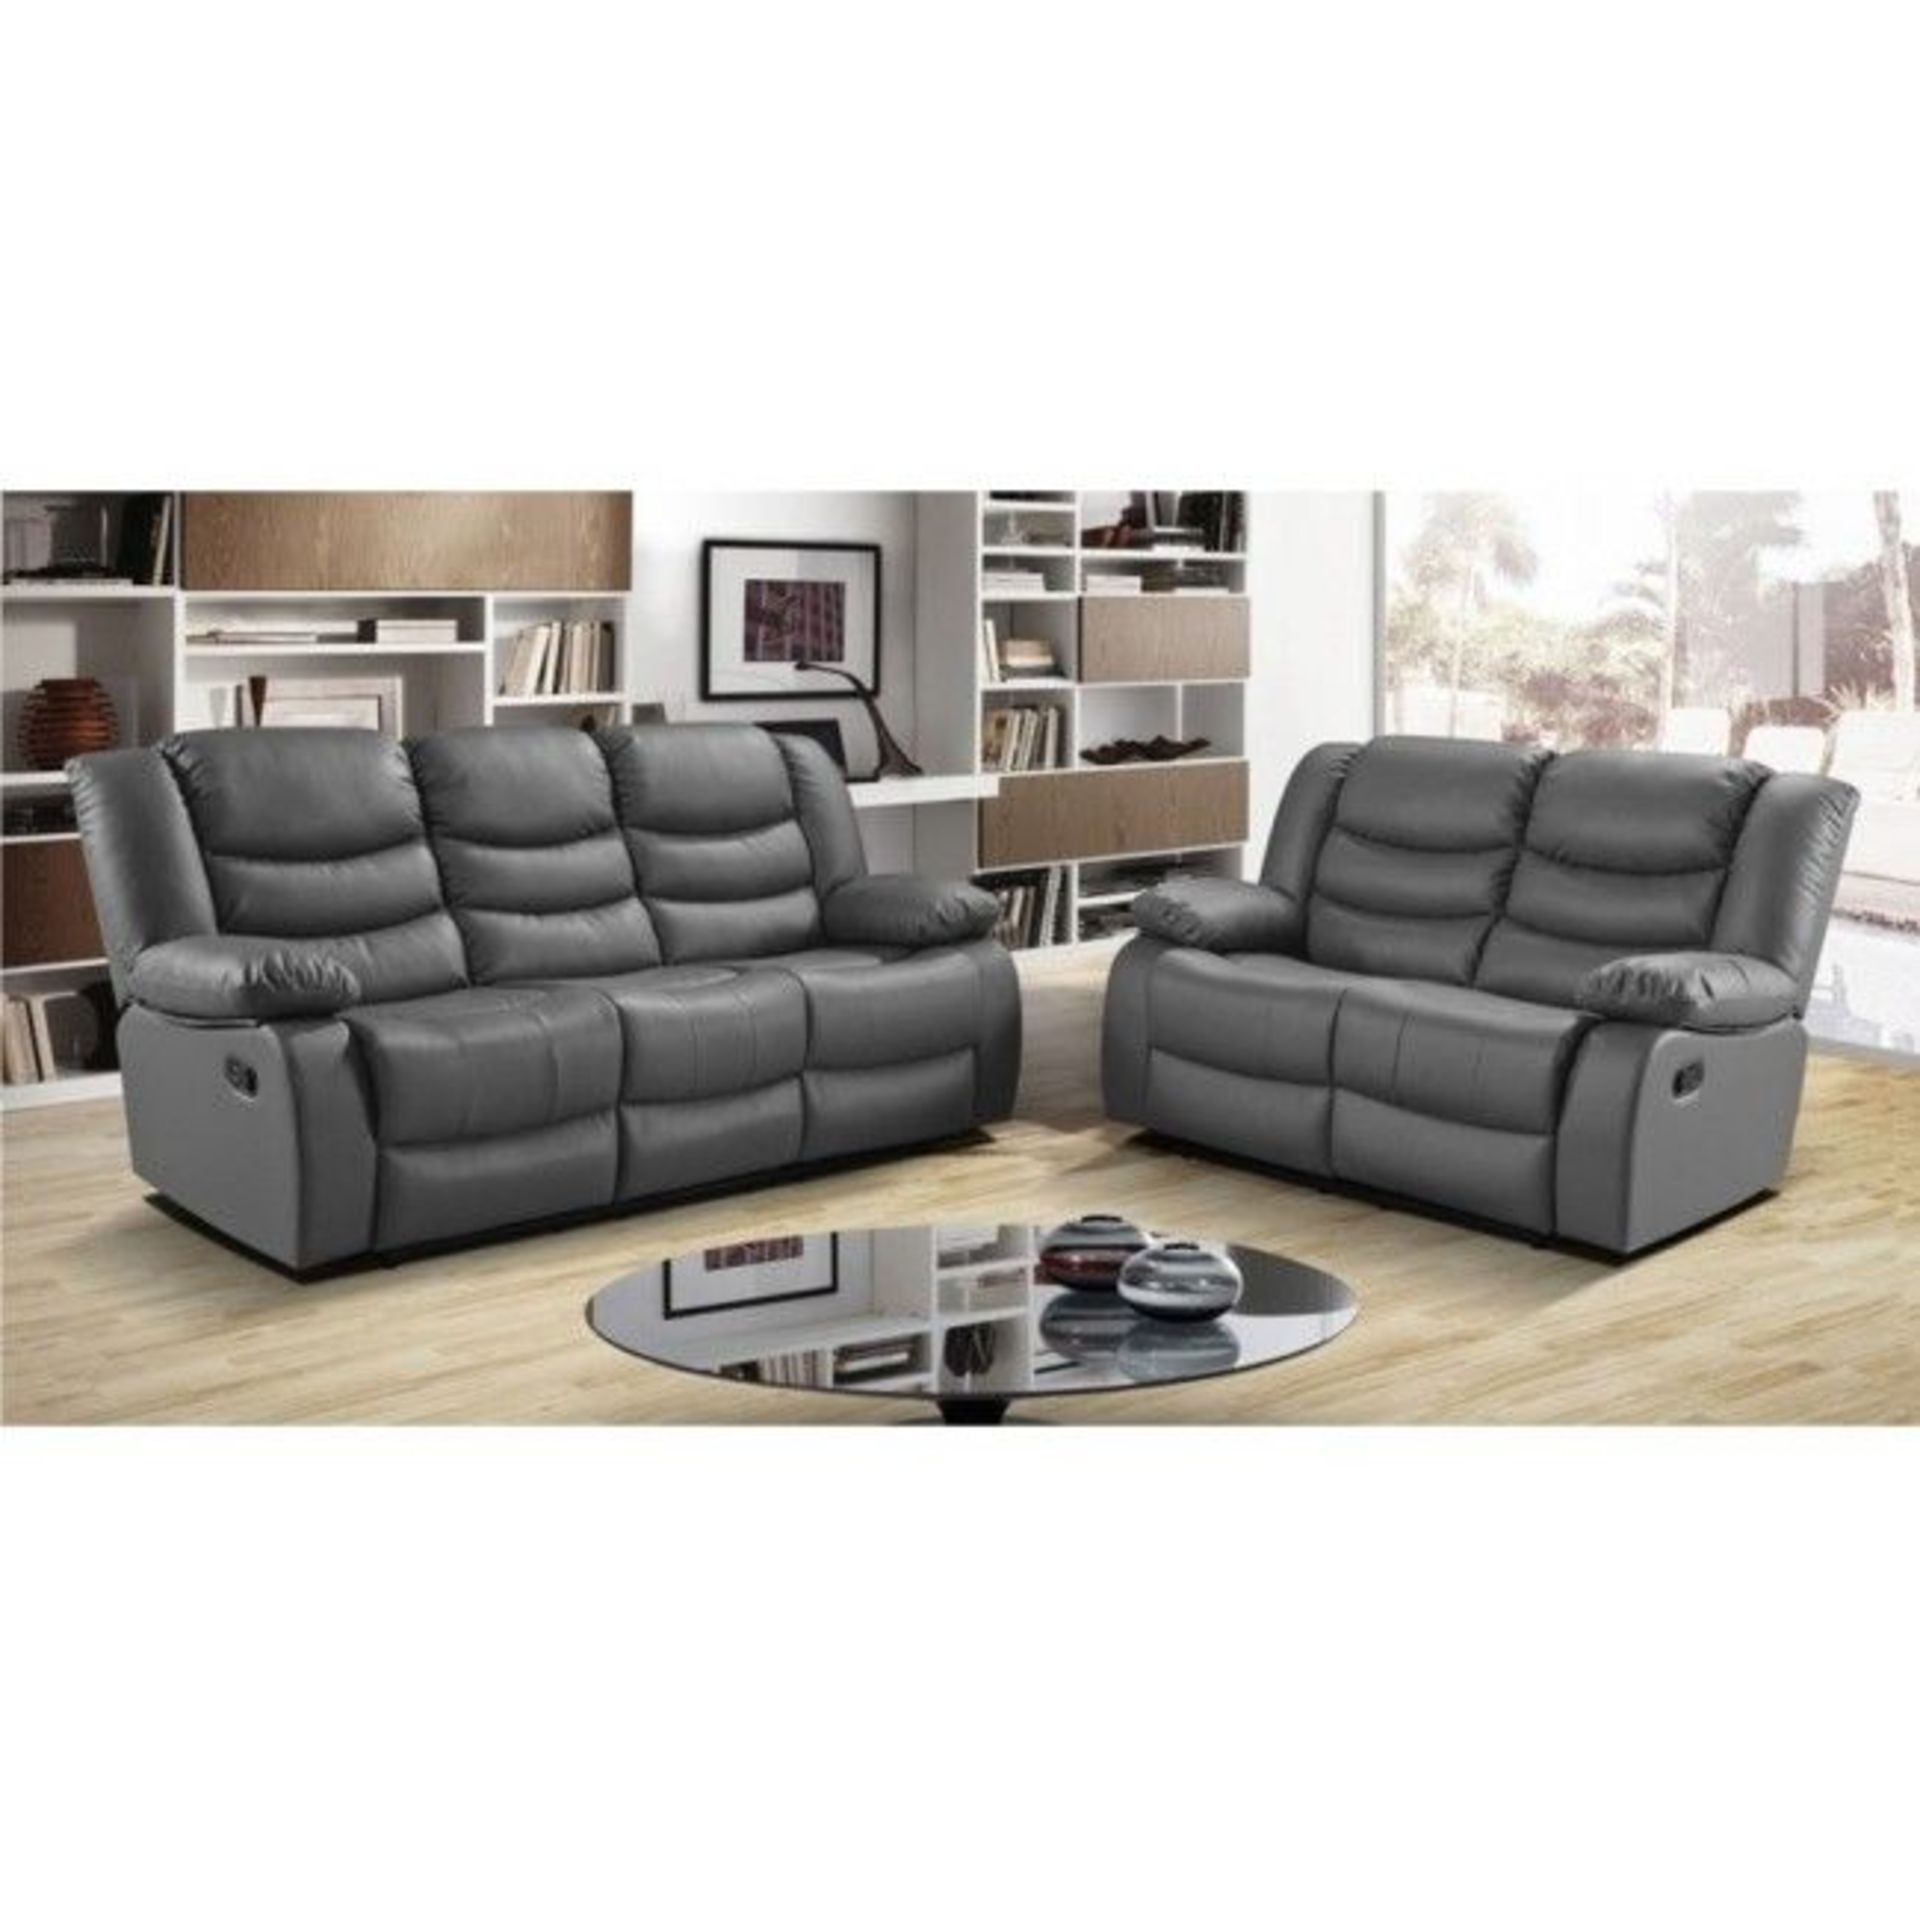 Brand new boxed Miami grey leather reclining sofas